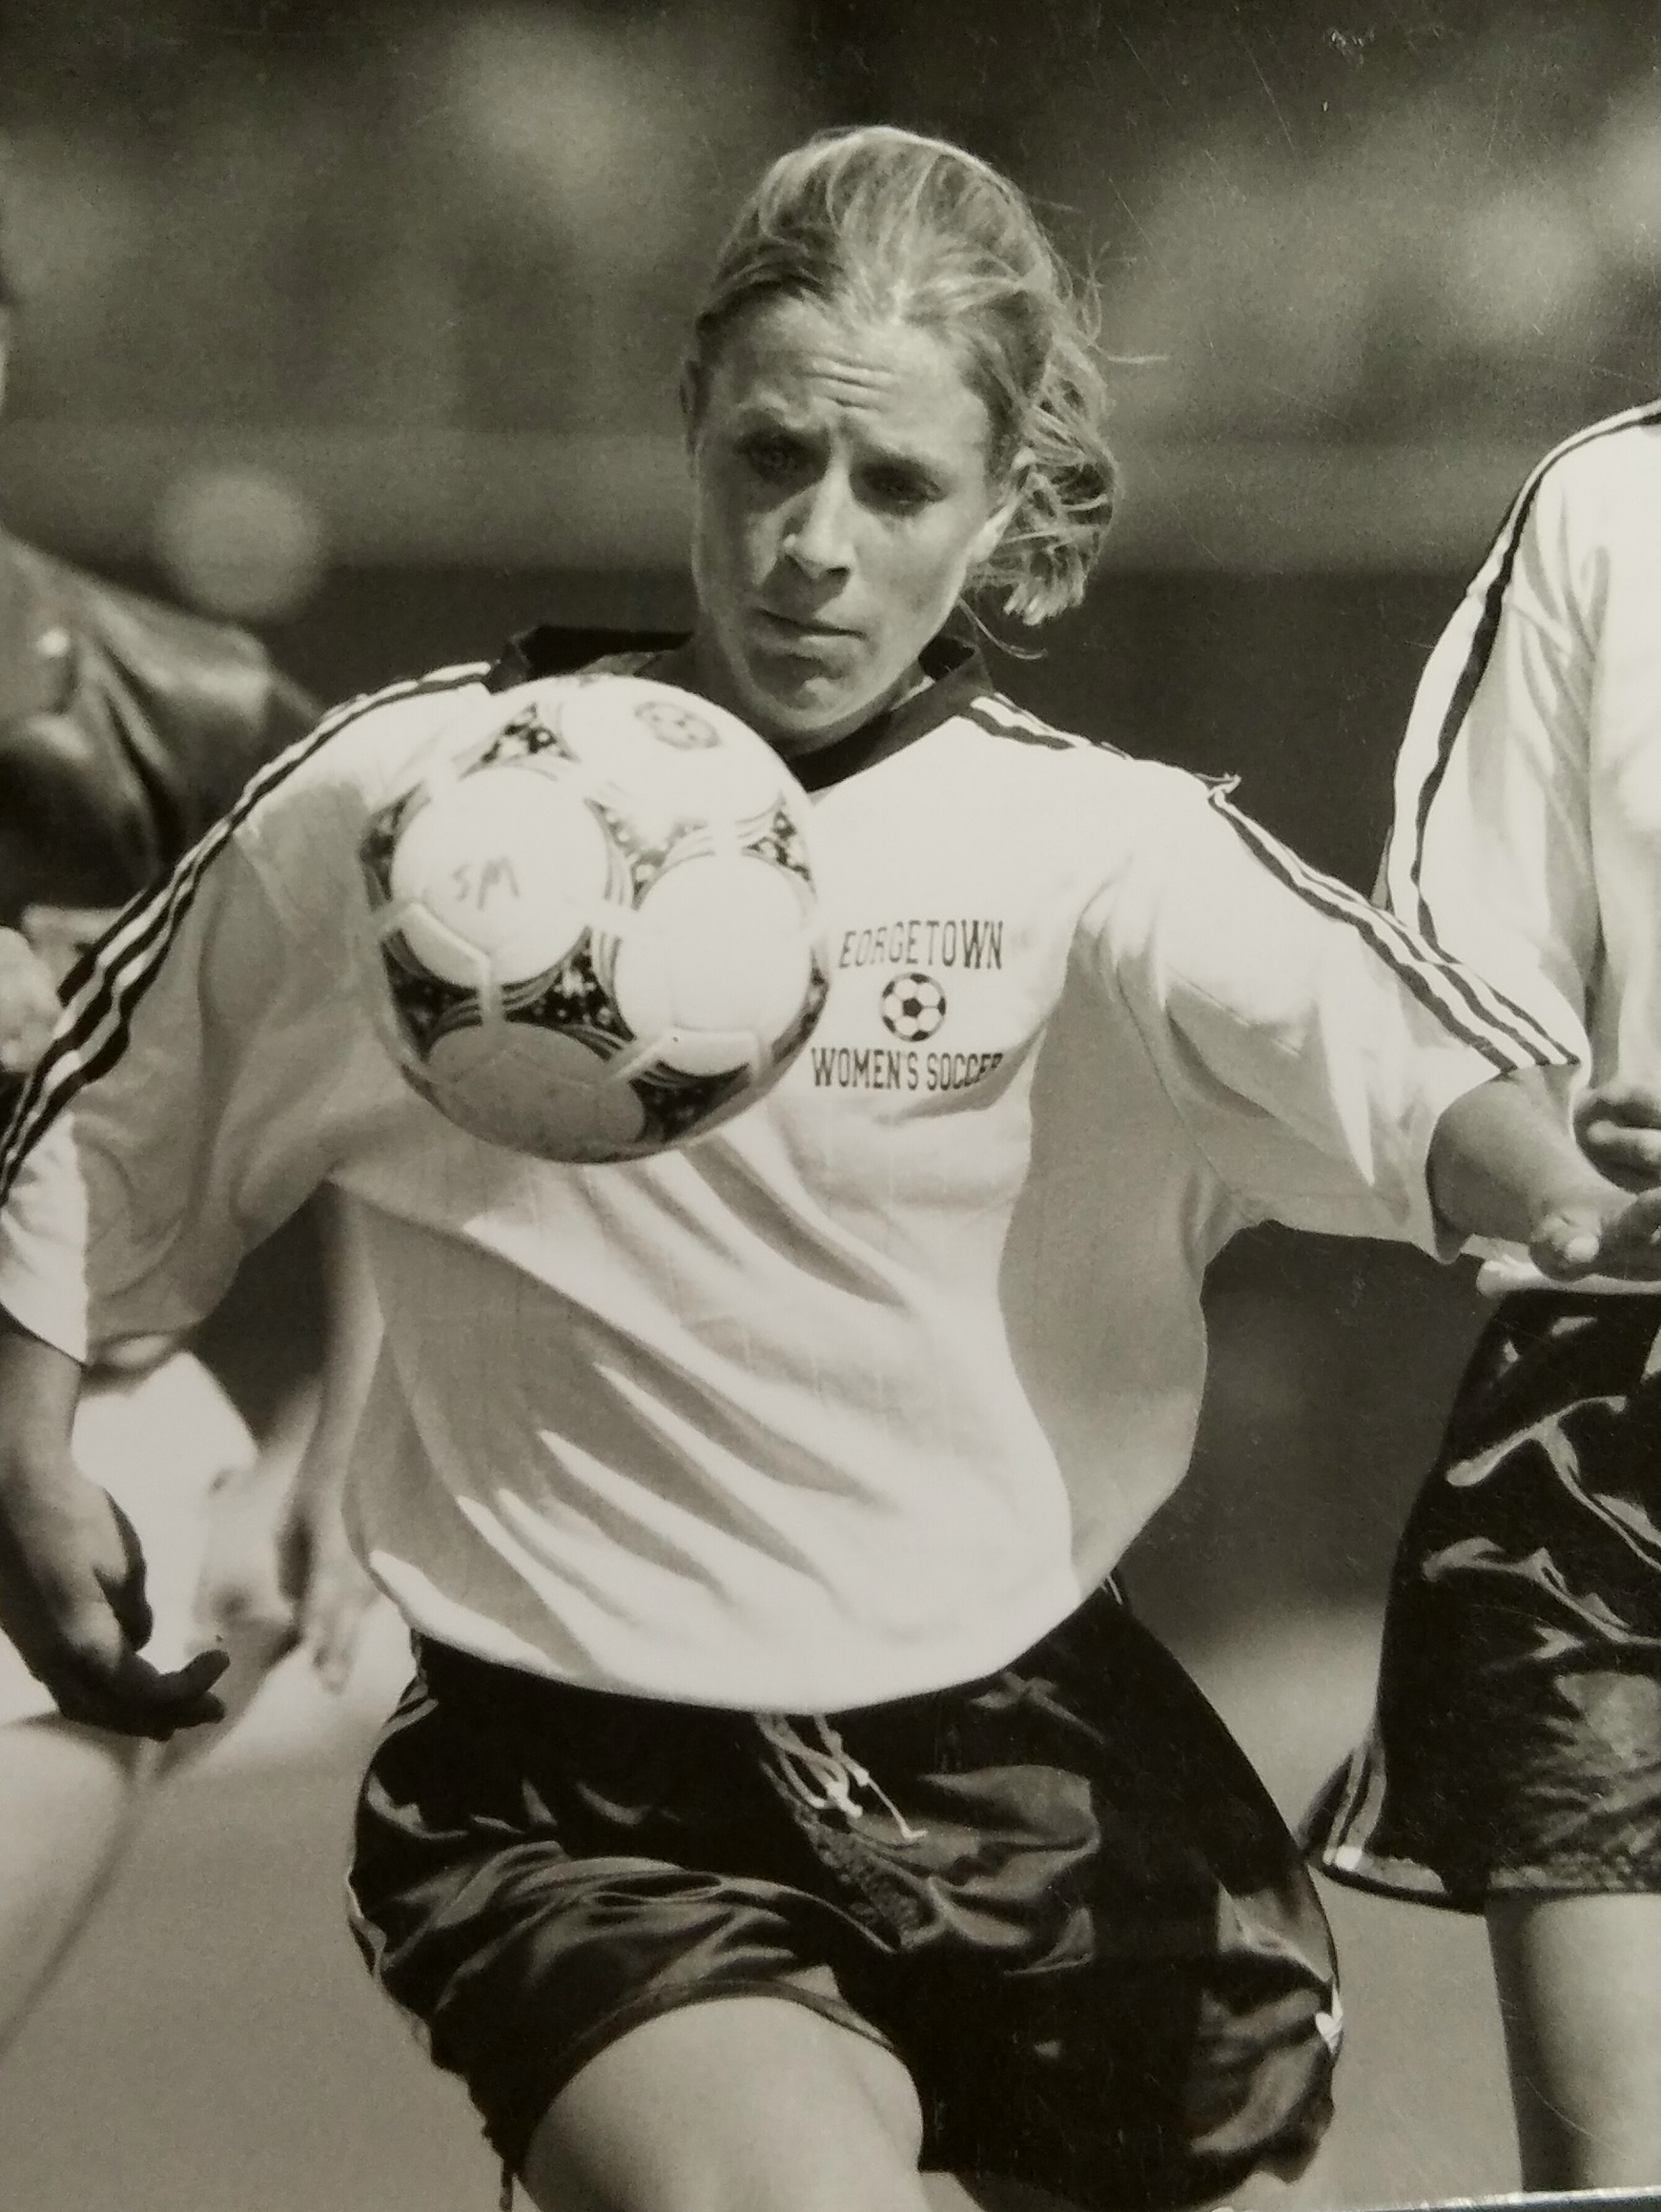 Christina Bruner, a standout striker and midfielder for the Georgetown University women’s soccer team from 1994 to 1997, will be the first women’s soccer player inducted into the university’s Hall of Fame in February.